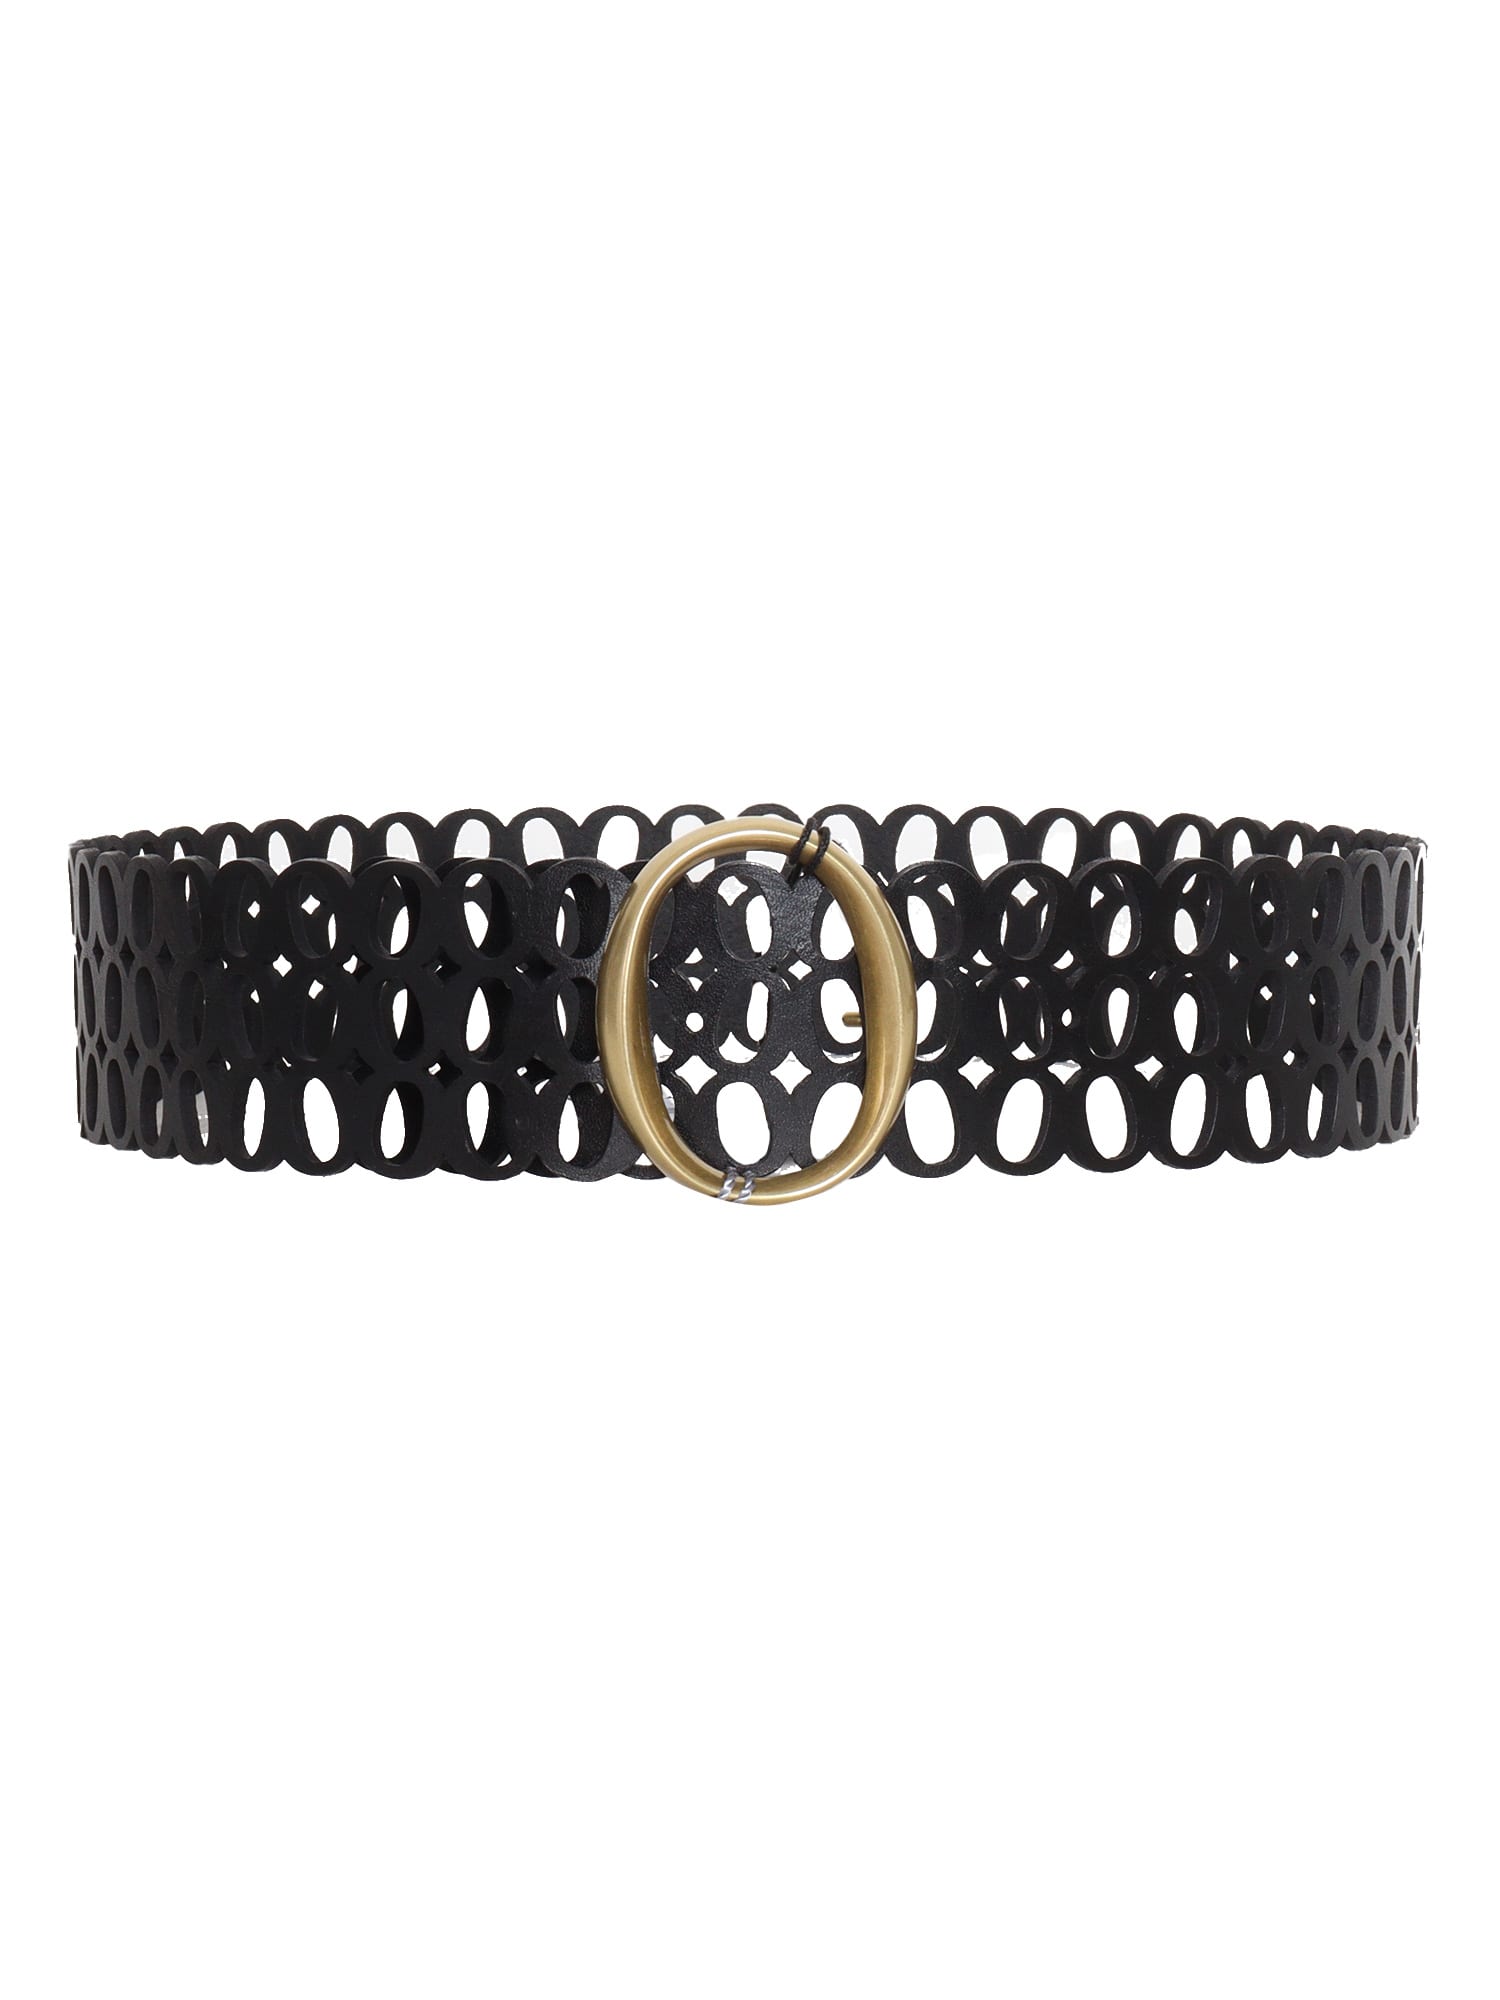 Perforated Leather Belt